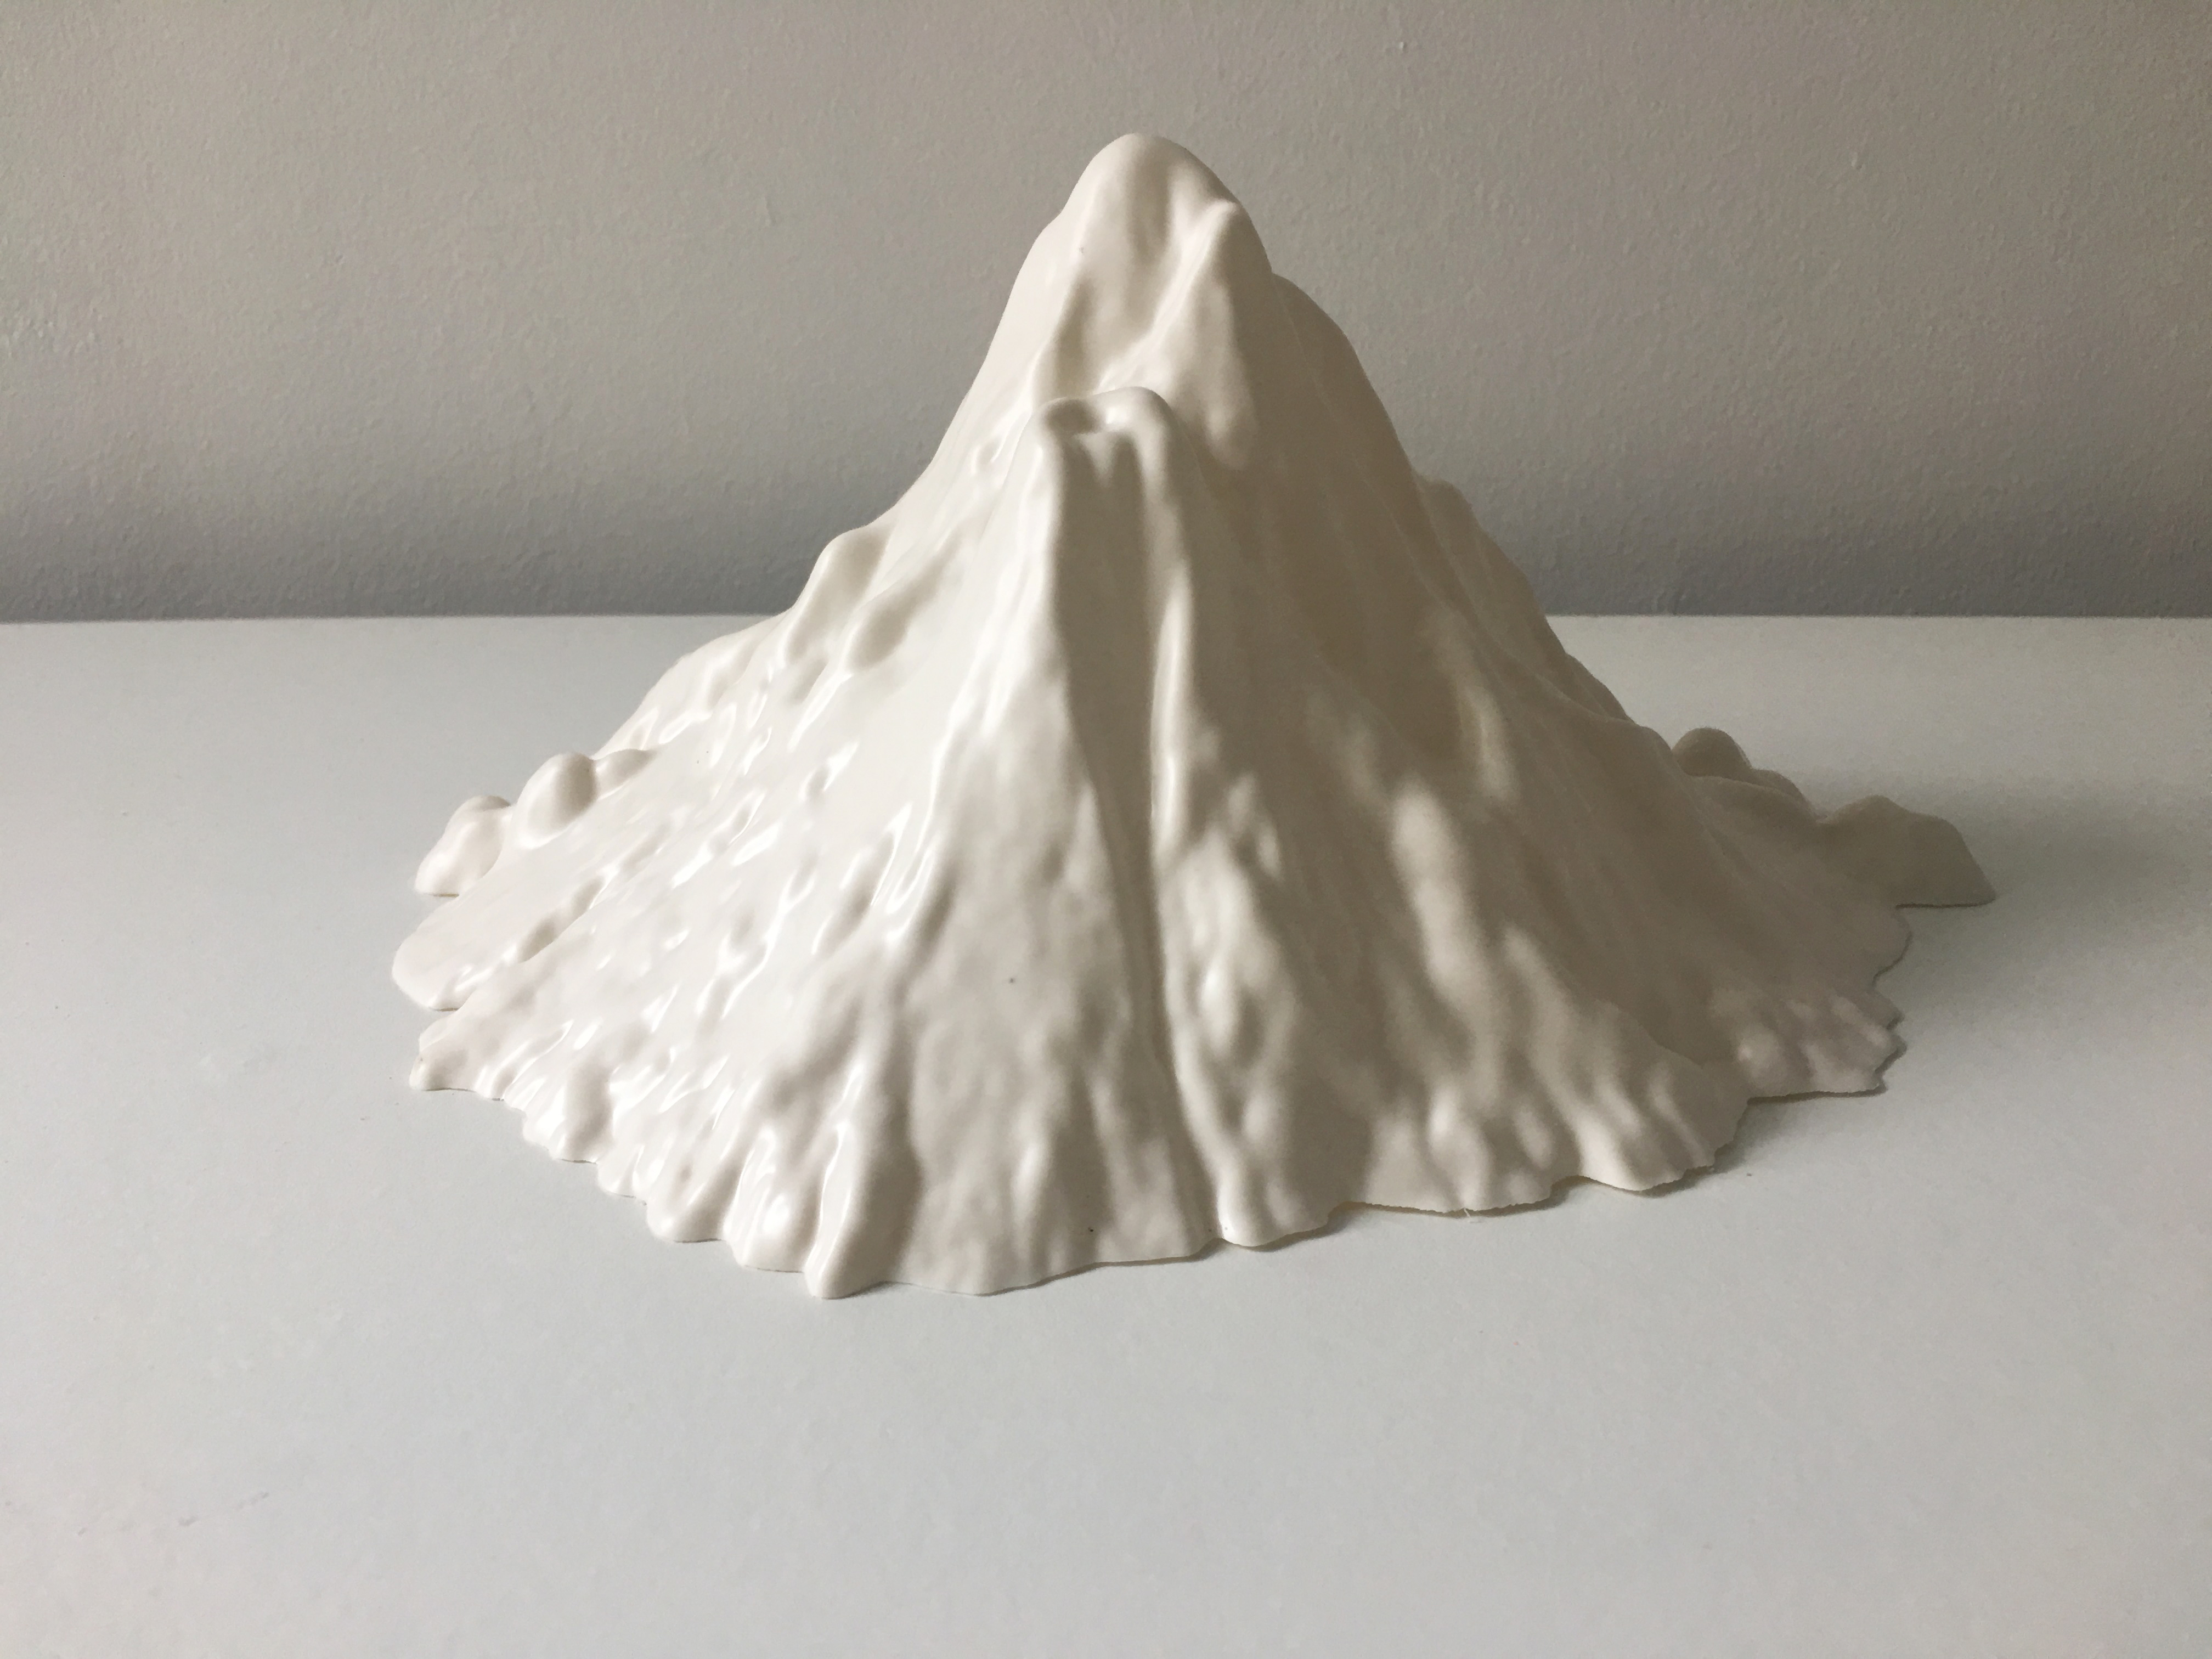 Katie Paterson, First There Is A Mountain, 2019. Image courtesy of and © the artist.